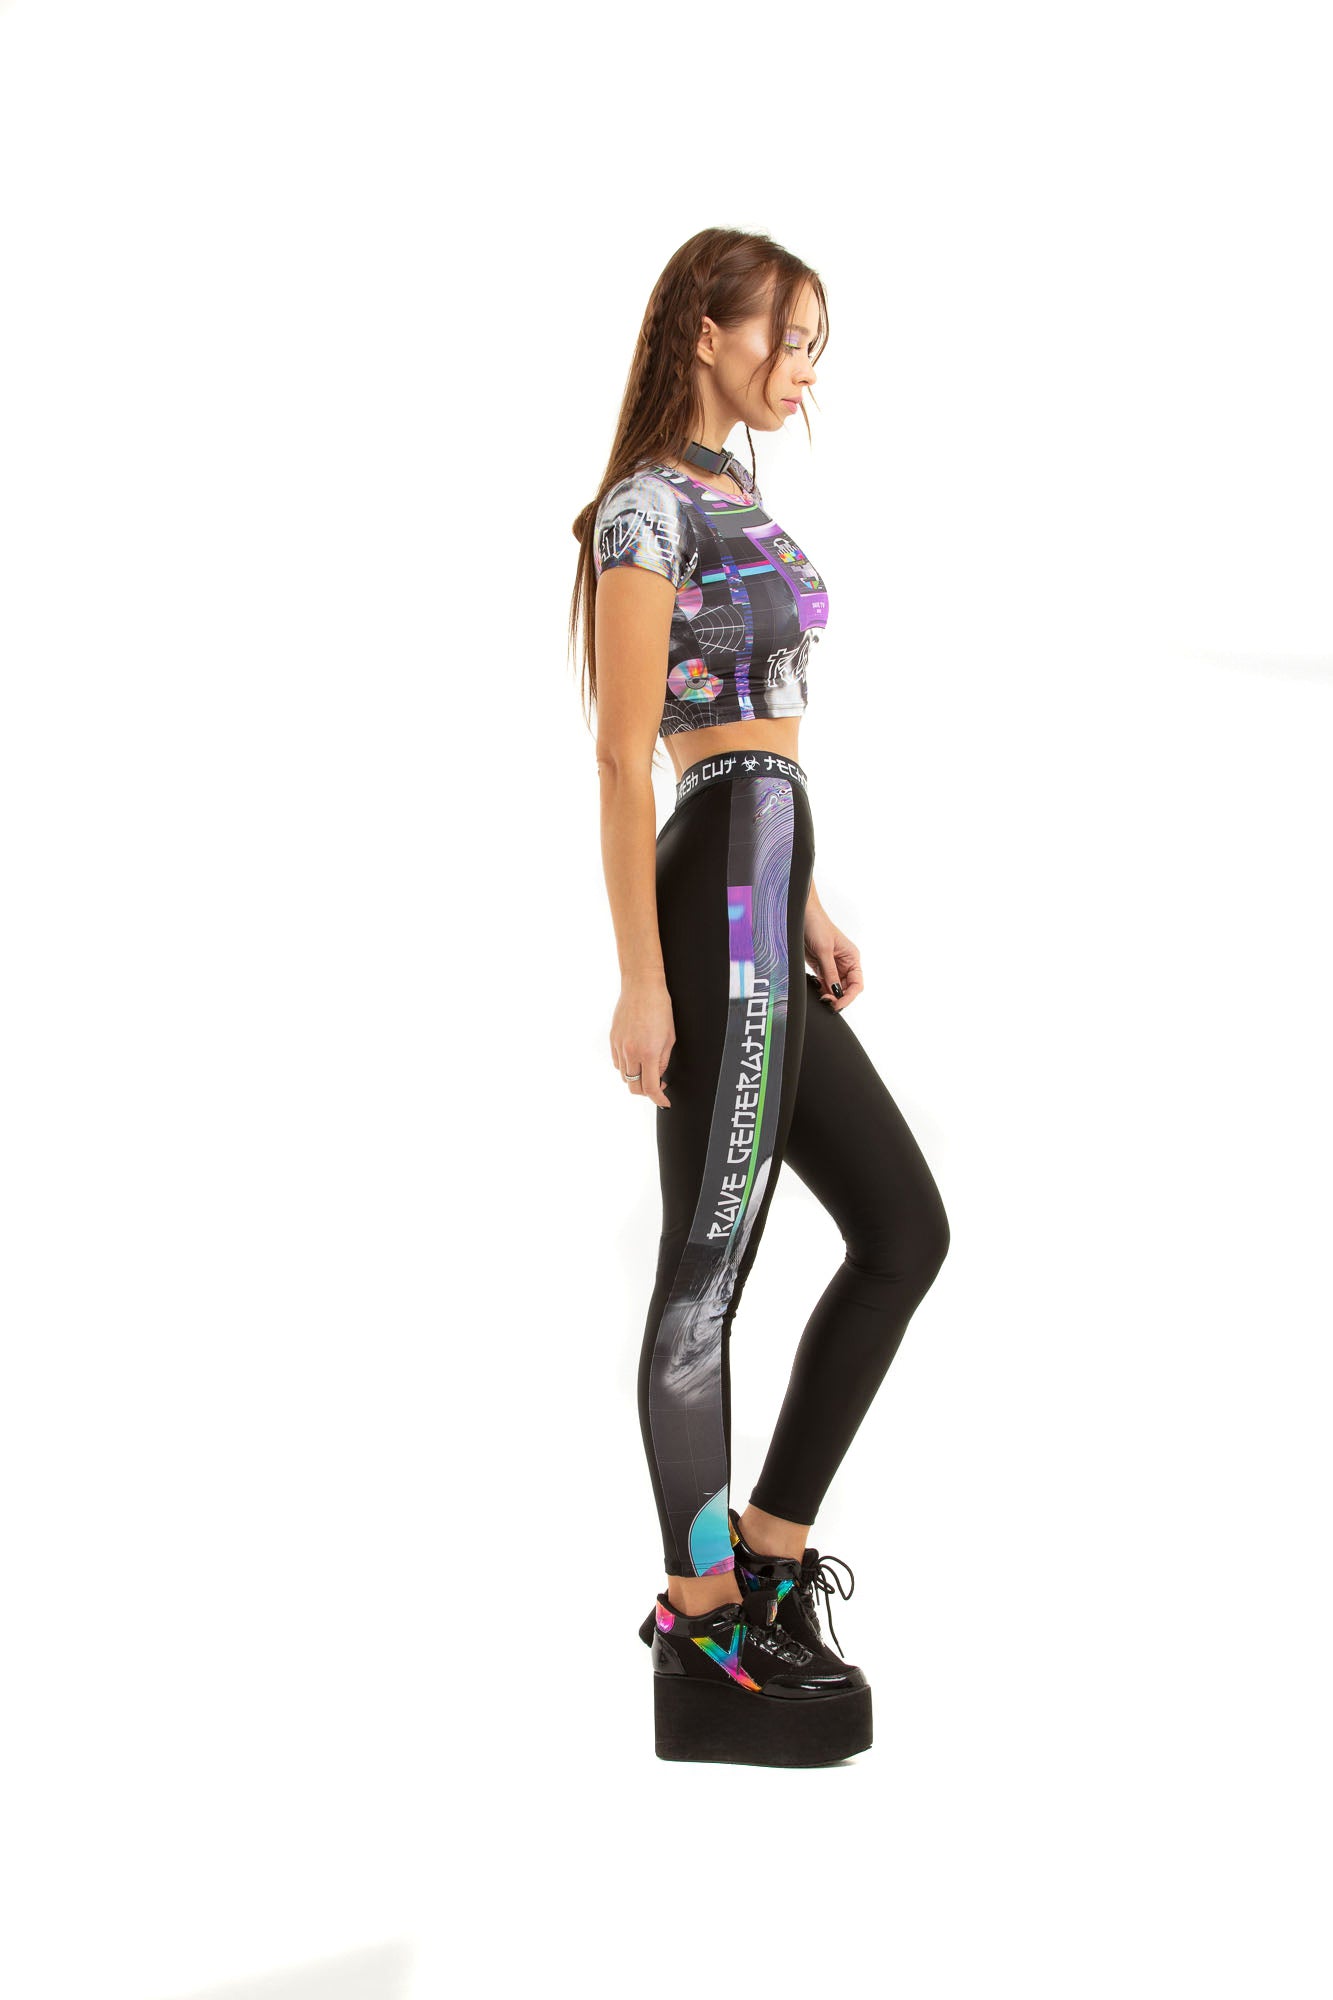 RAVE TV leggings with printed side-stripes